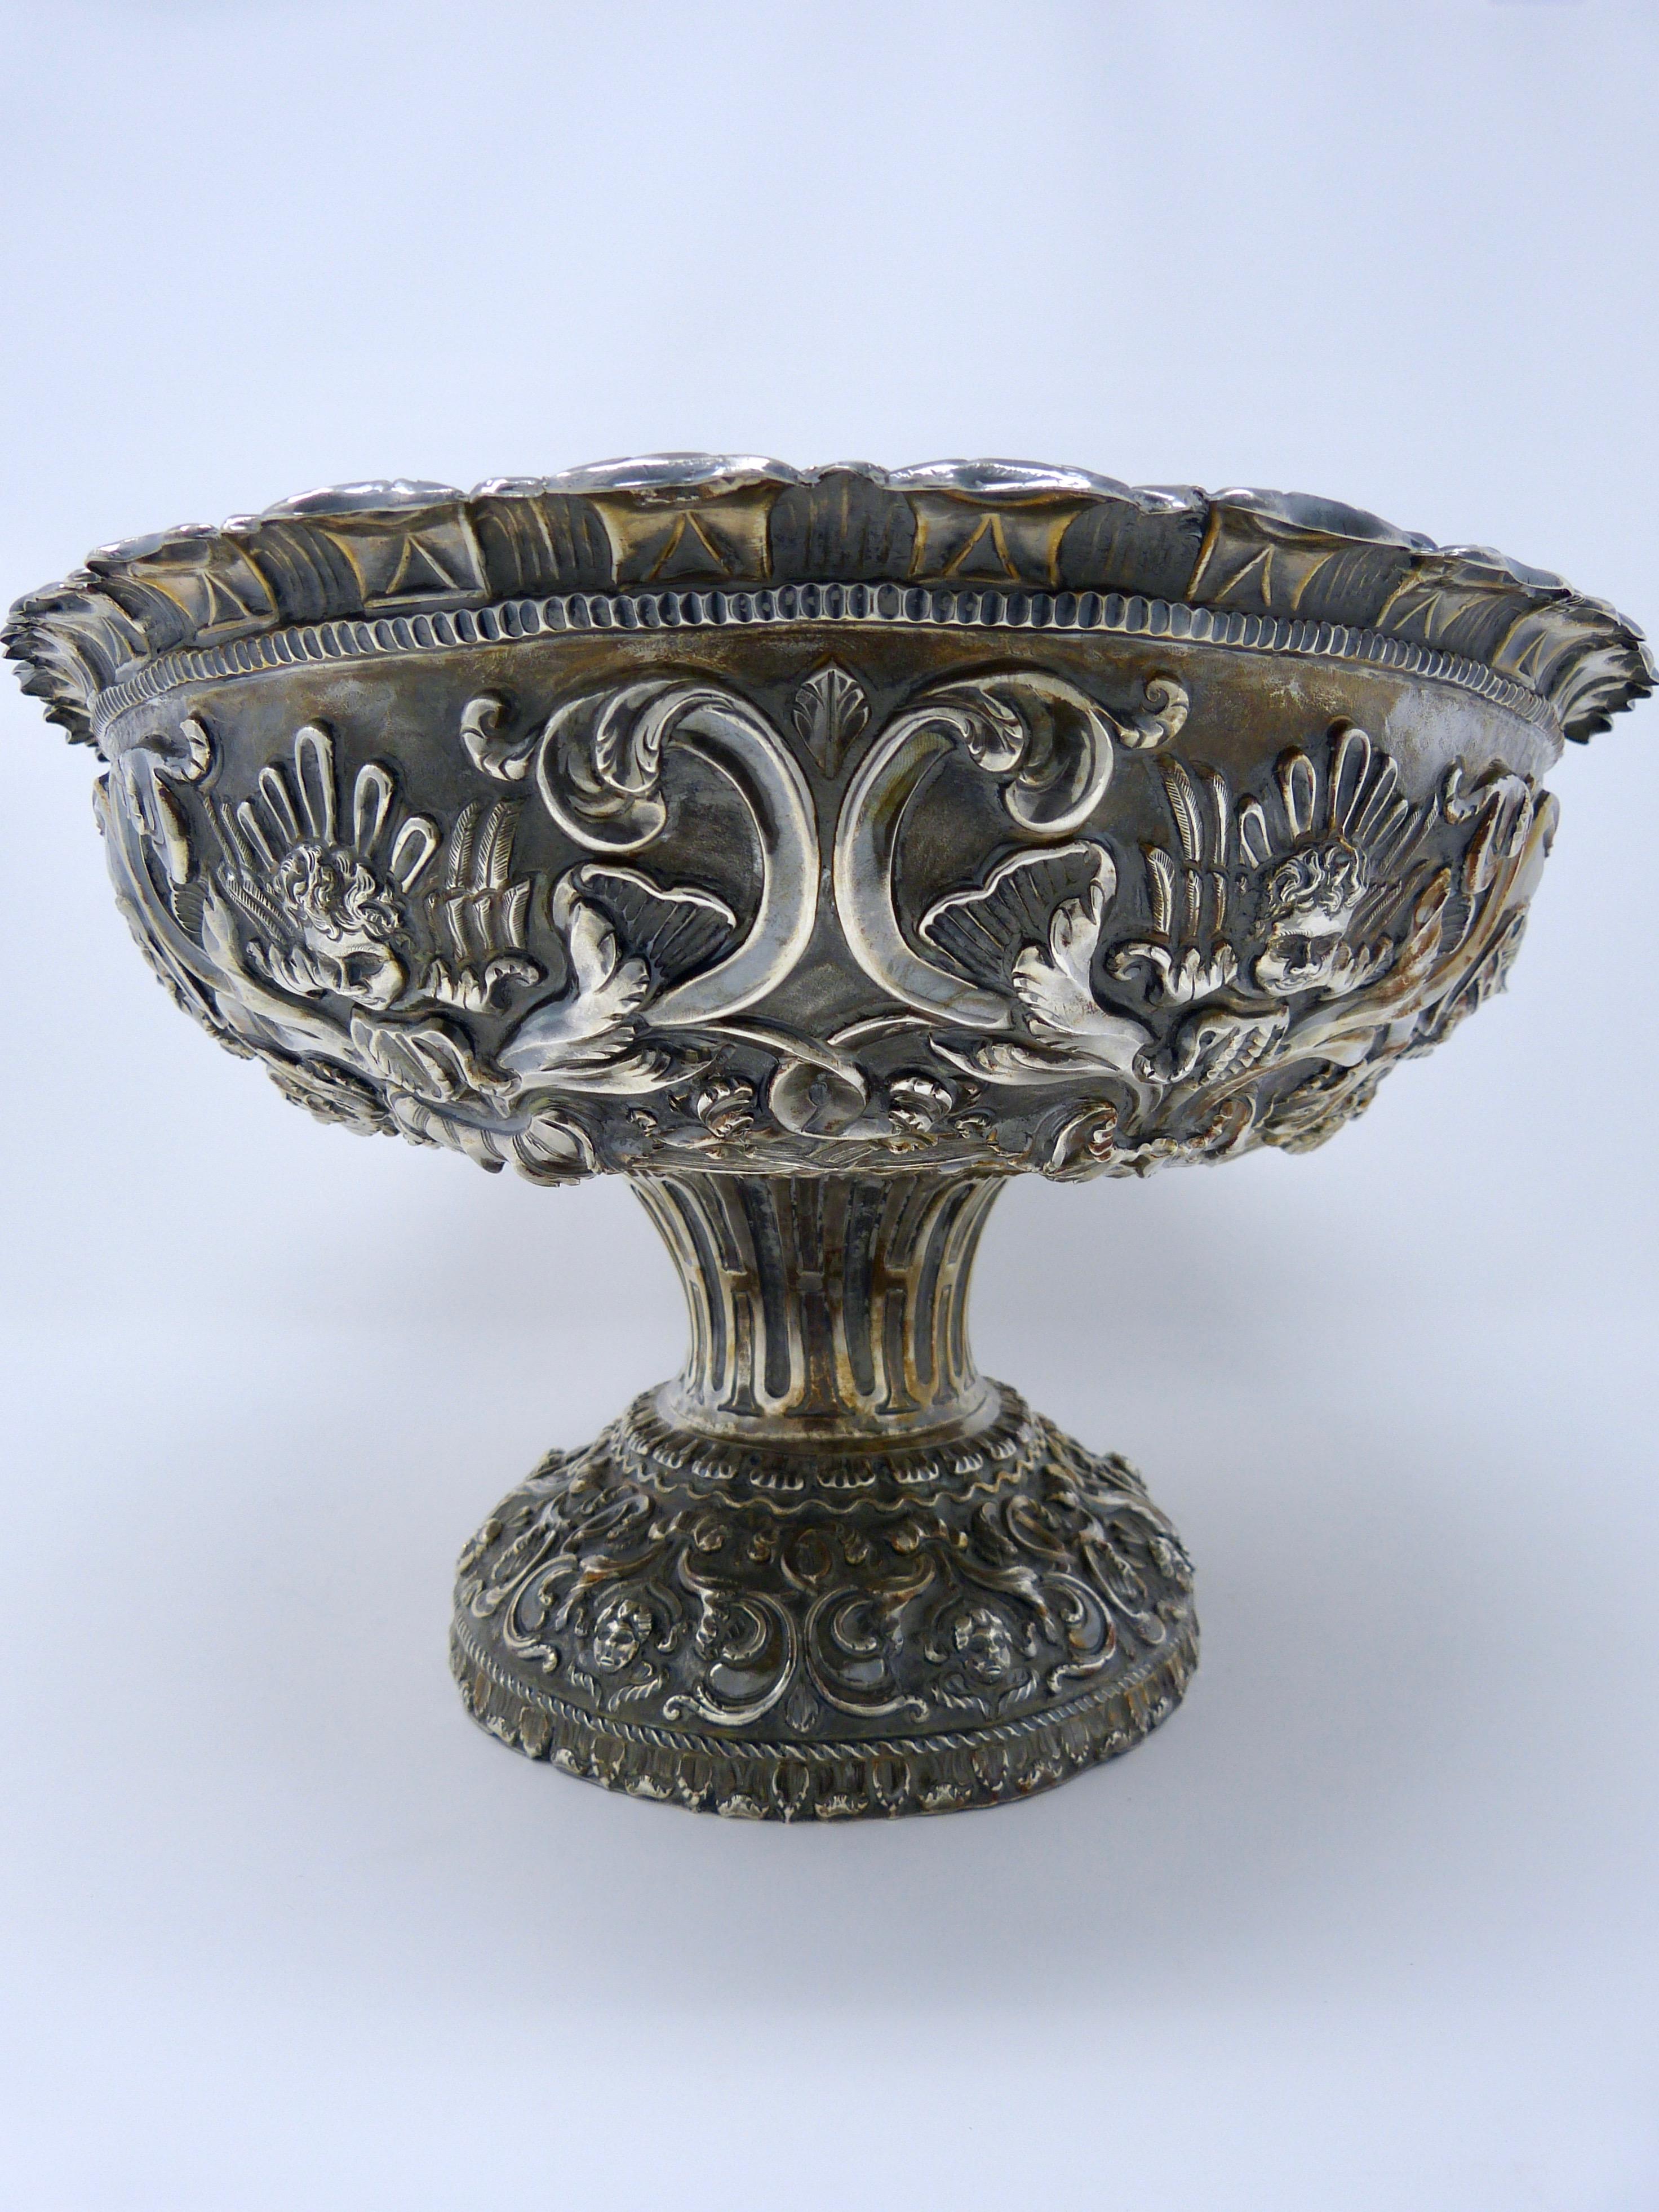 20th Century Spanish Colonial Style Sterling Silver Centerpiece Dish Vase with Cherubs 0.925 For Sale